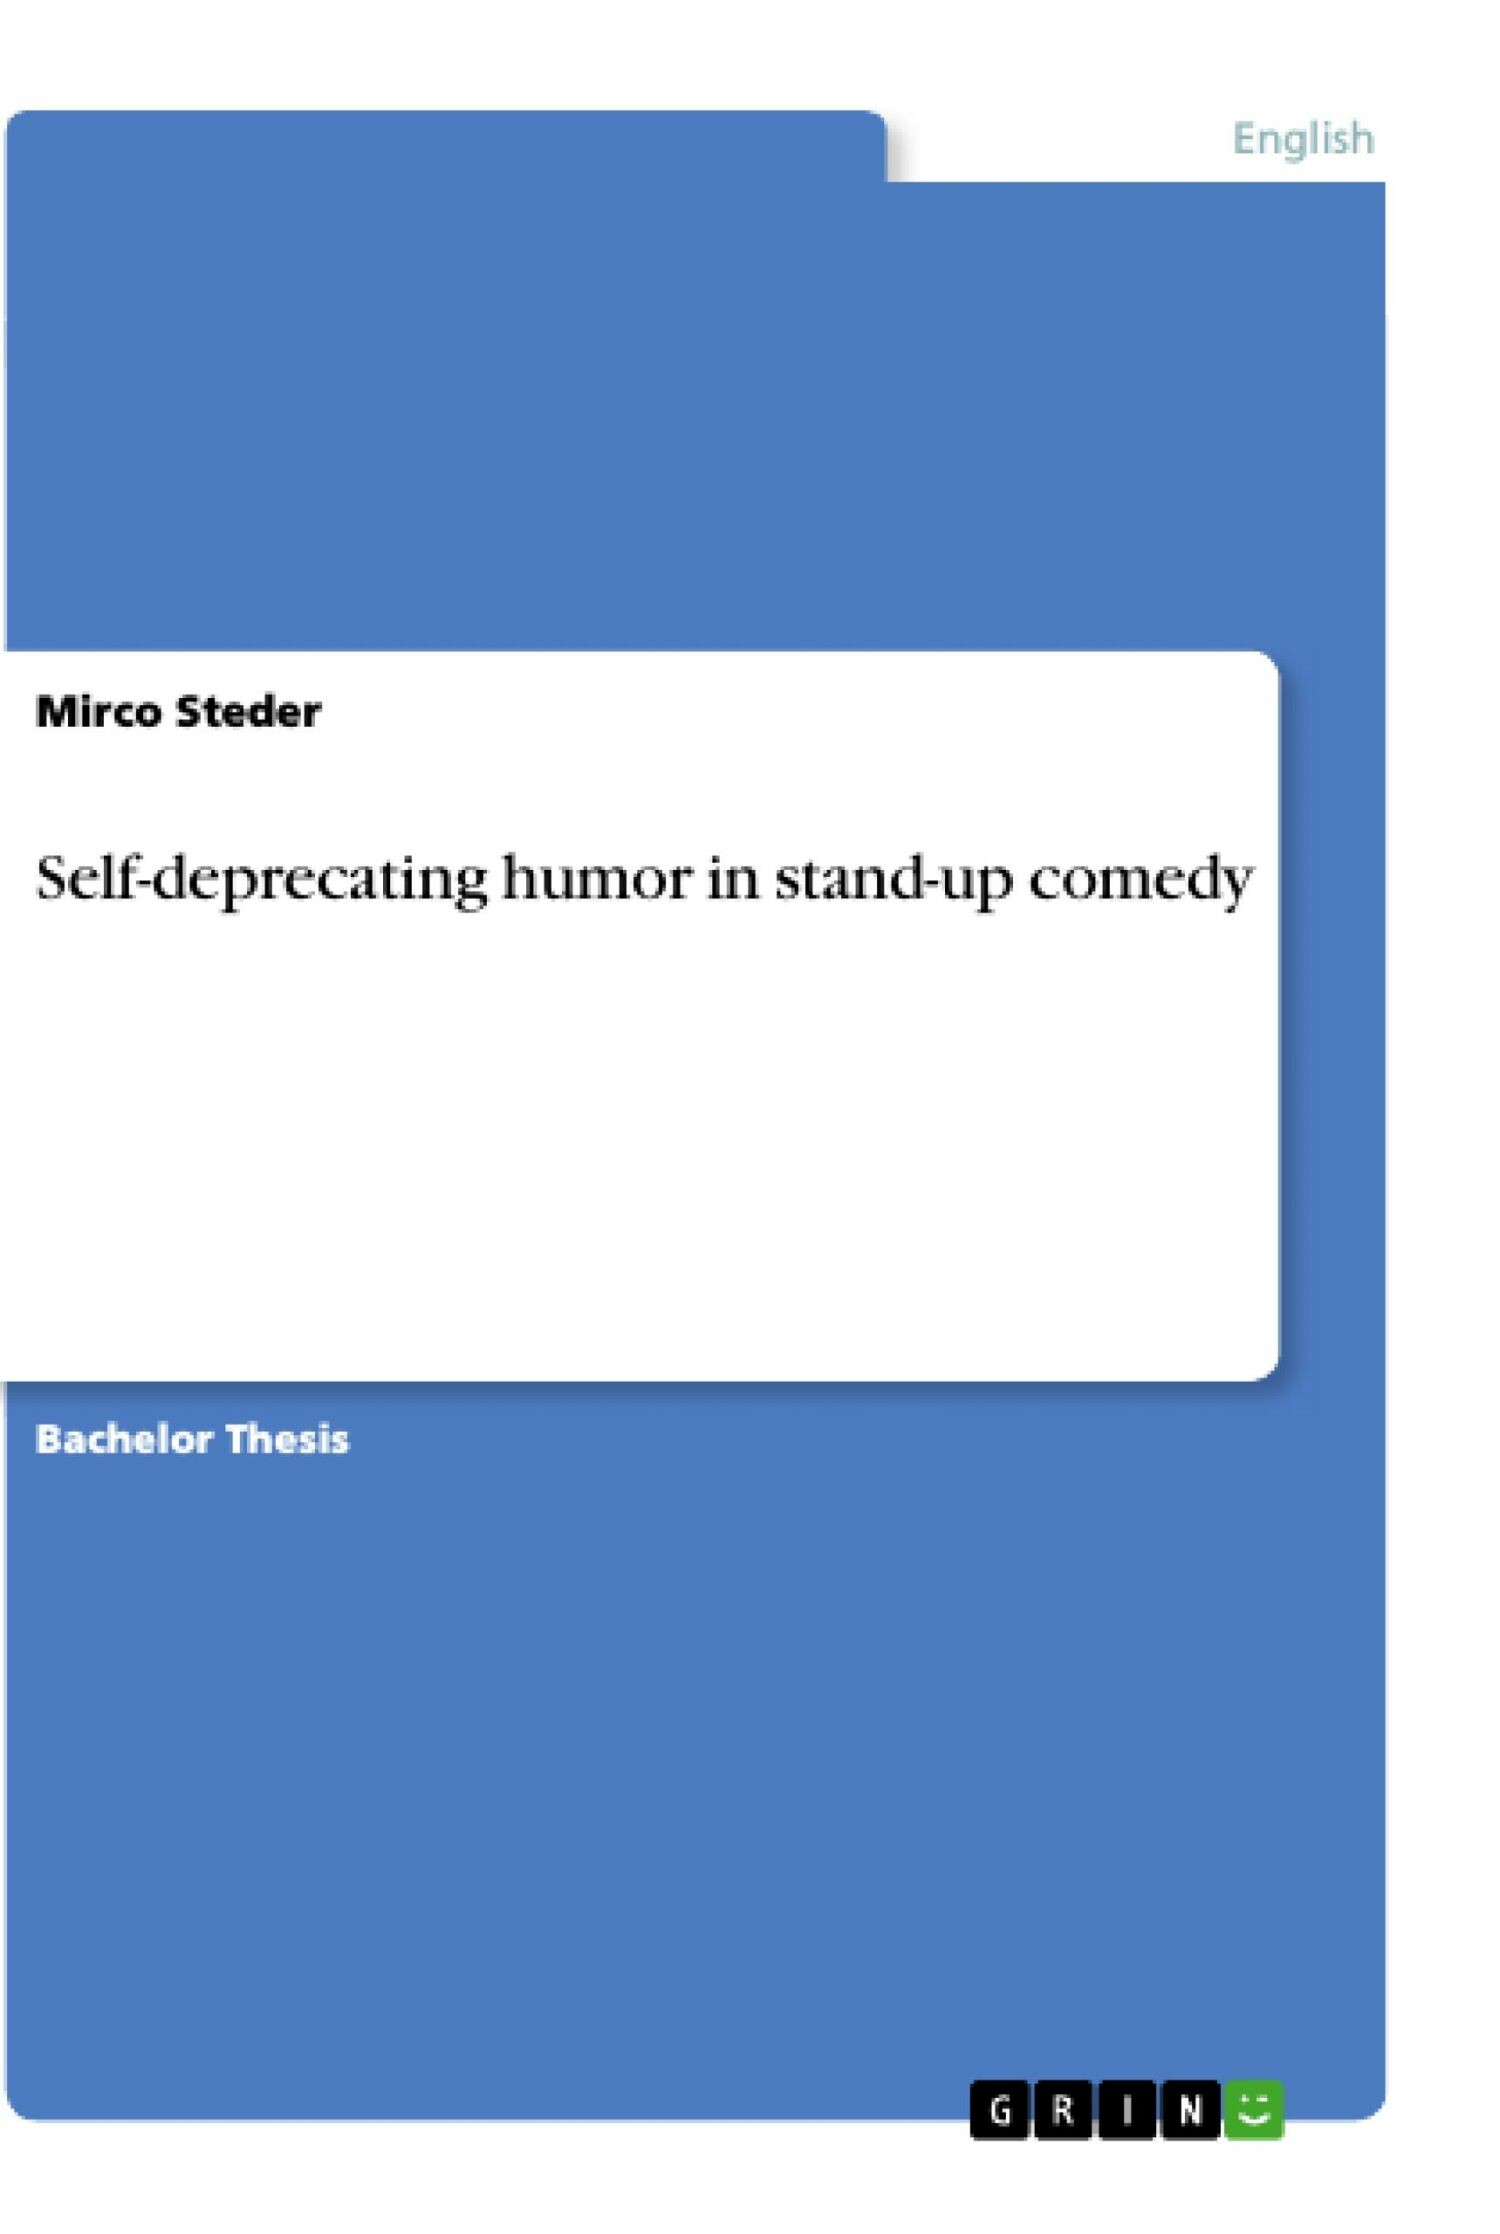 Self-deprecating humor in stand-up comedy